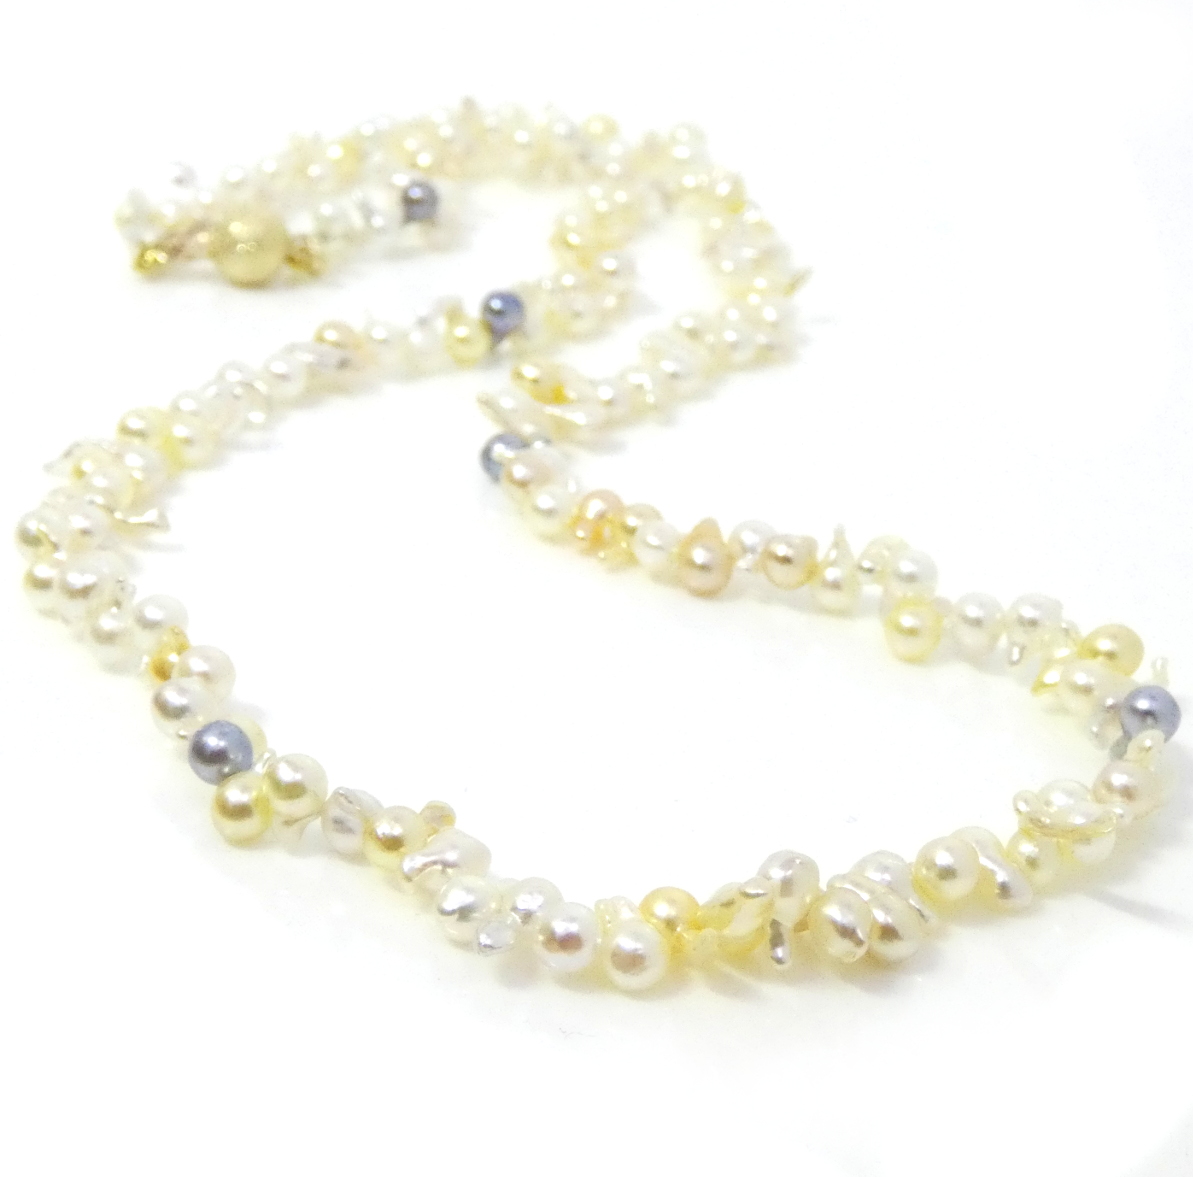 Multicoloured Akoya 'Acupuncture' Pearls Necklace